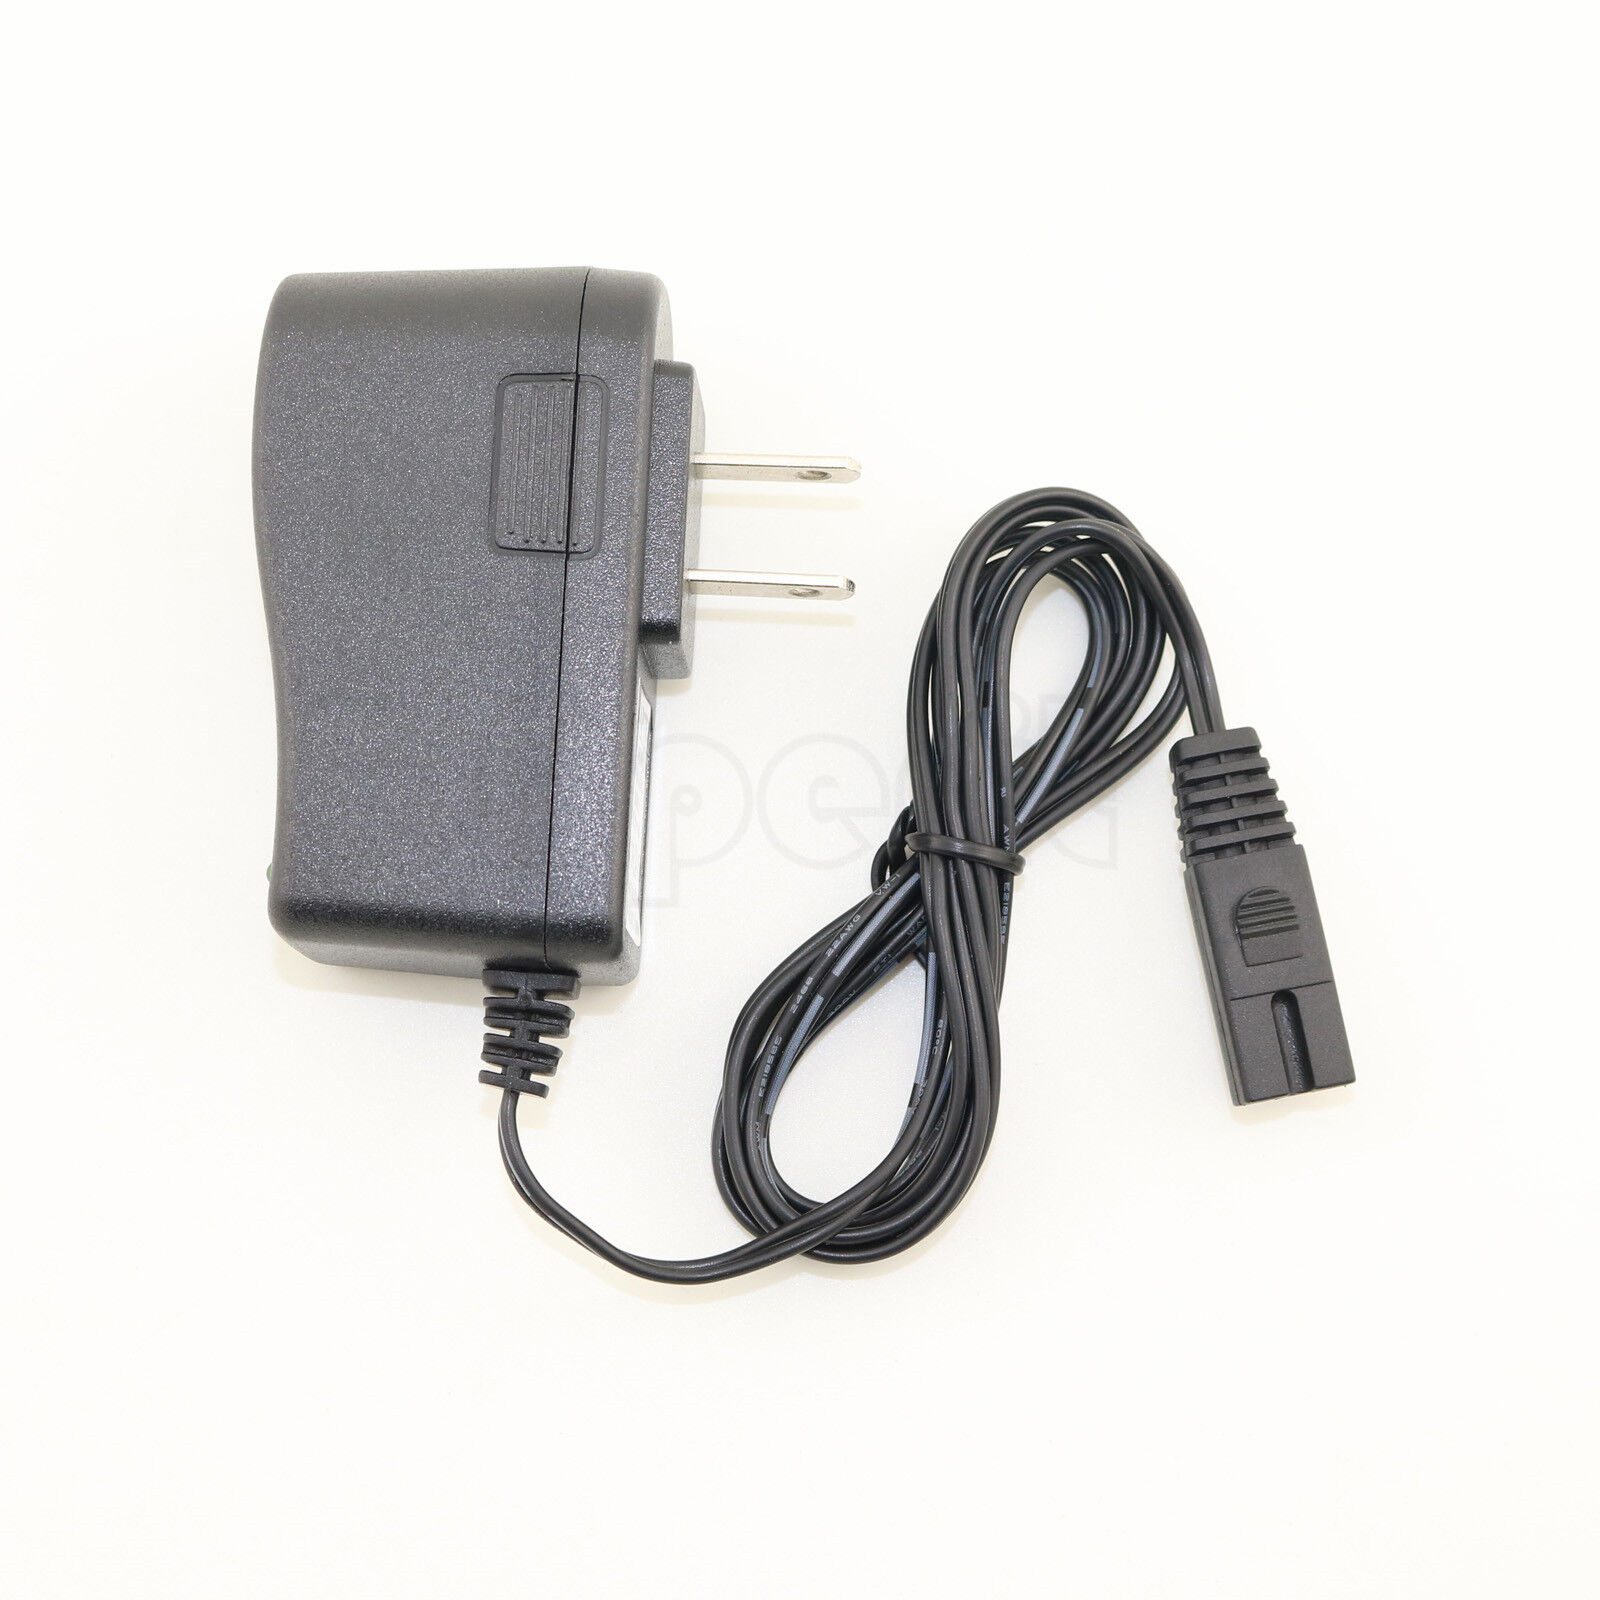 *Brand NEW* Wahl Bump-Free Shaver 7060, 7060-700, 7339 AC Adapter Power Cord Charger For Wahl Bum AC Adapter P